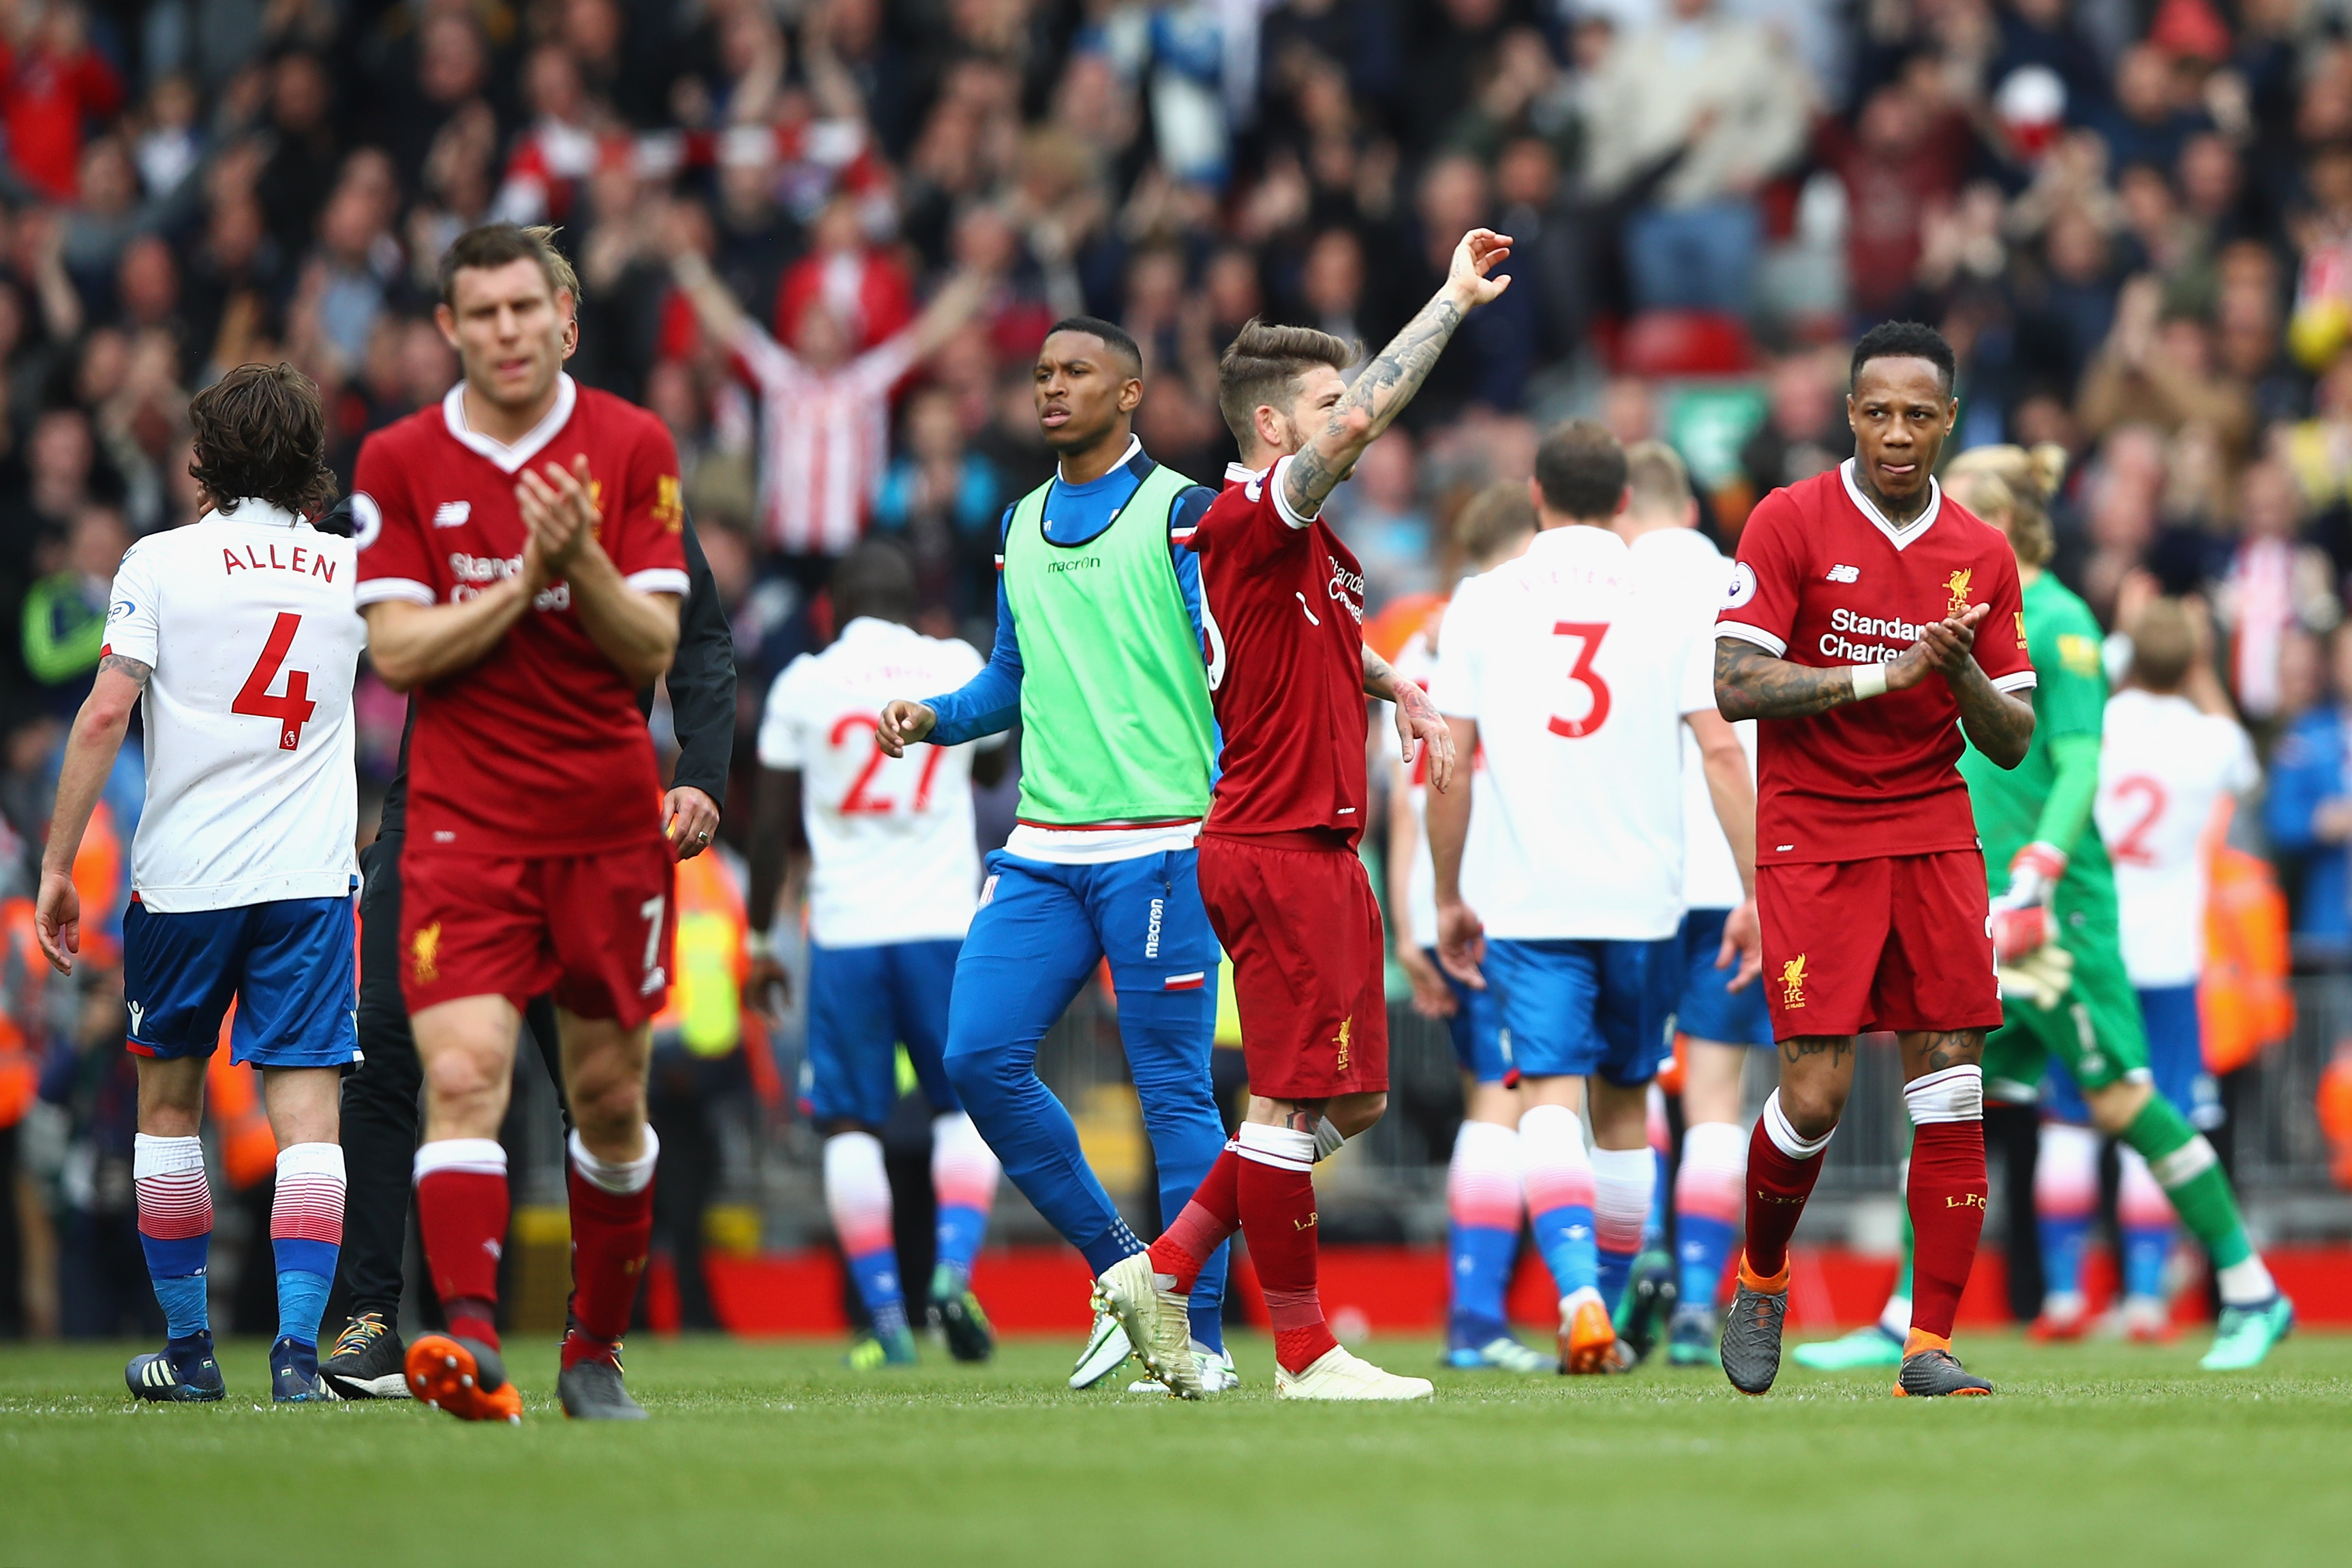 LIVERPOOL, ENGLAND - APRIL 28:  Nathaniel Clyne of Liverpool applauds fans during the Premier League match between Liverpool and Stoke City at Anfield on April 28, 2018 in Liverpool, England.  (Photo by Clive Brunskill/Getty Images)